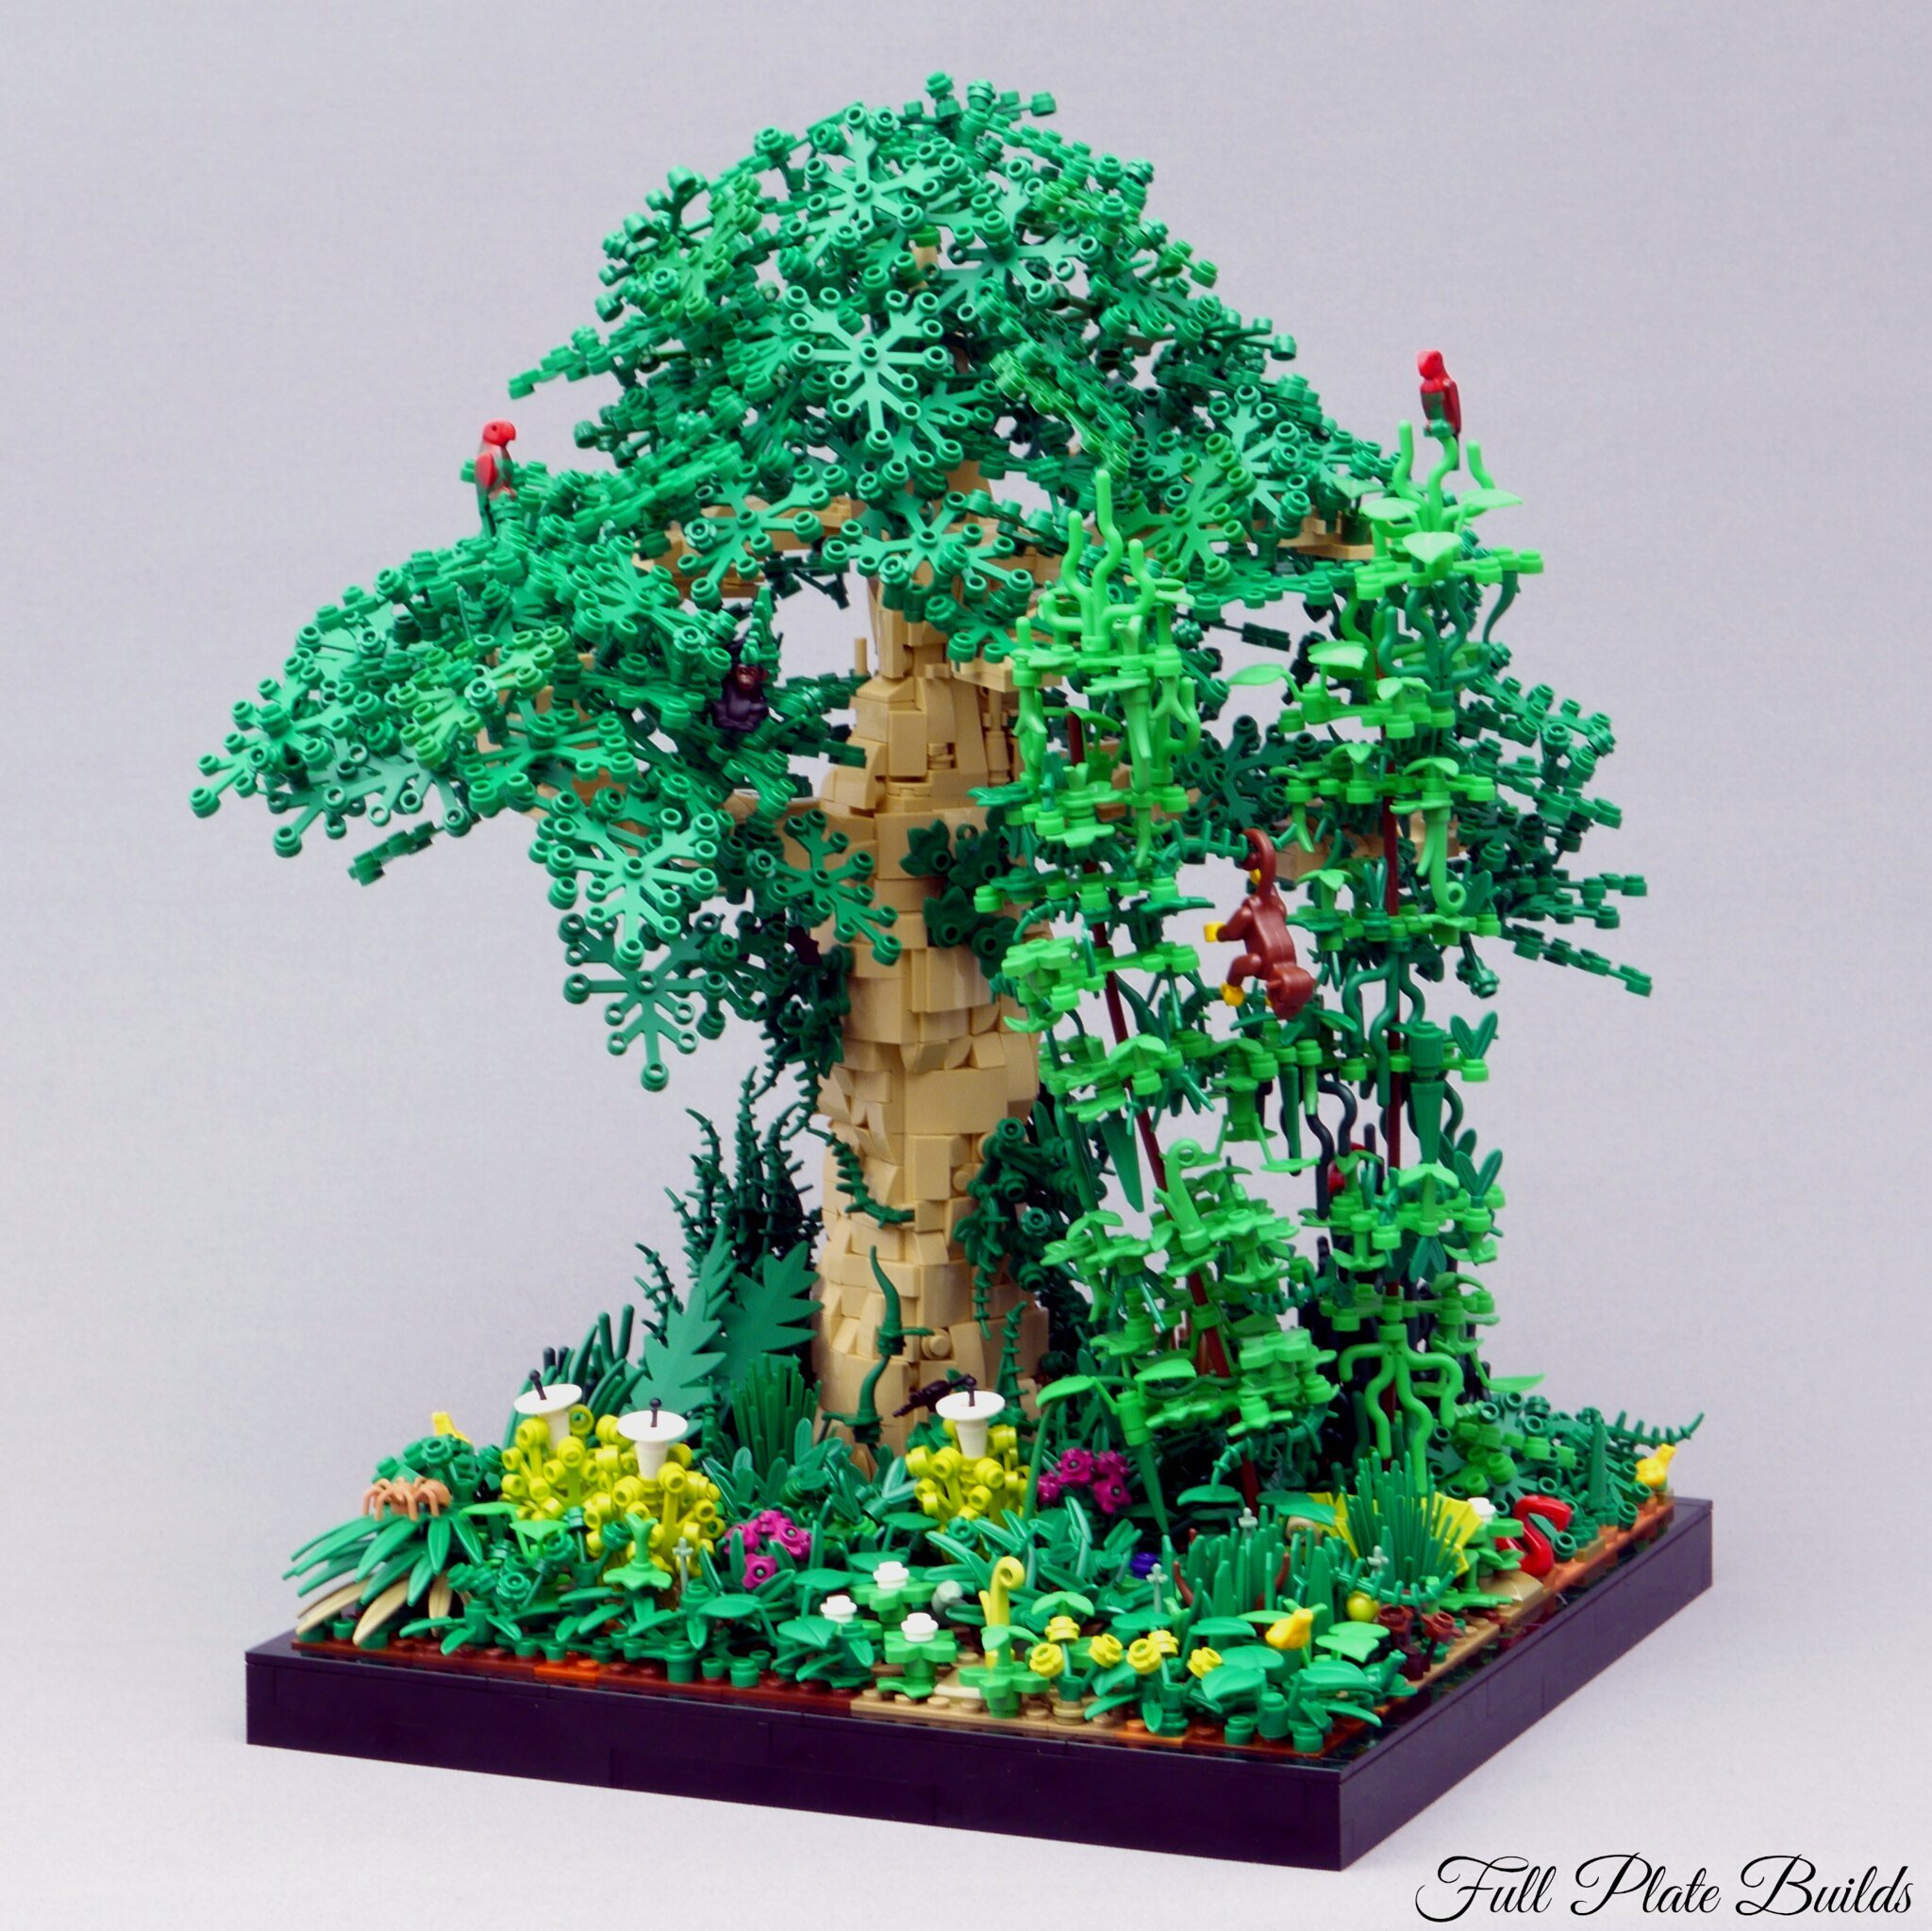 Nature Freak: An Interview with LEGO Lidé BrickNerd - All things LEGO and the LEGO fan community